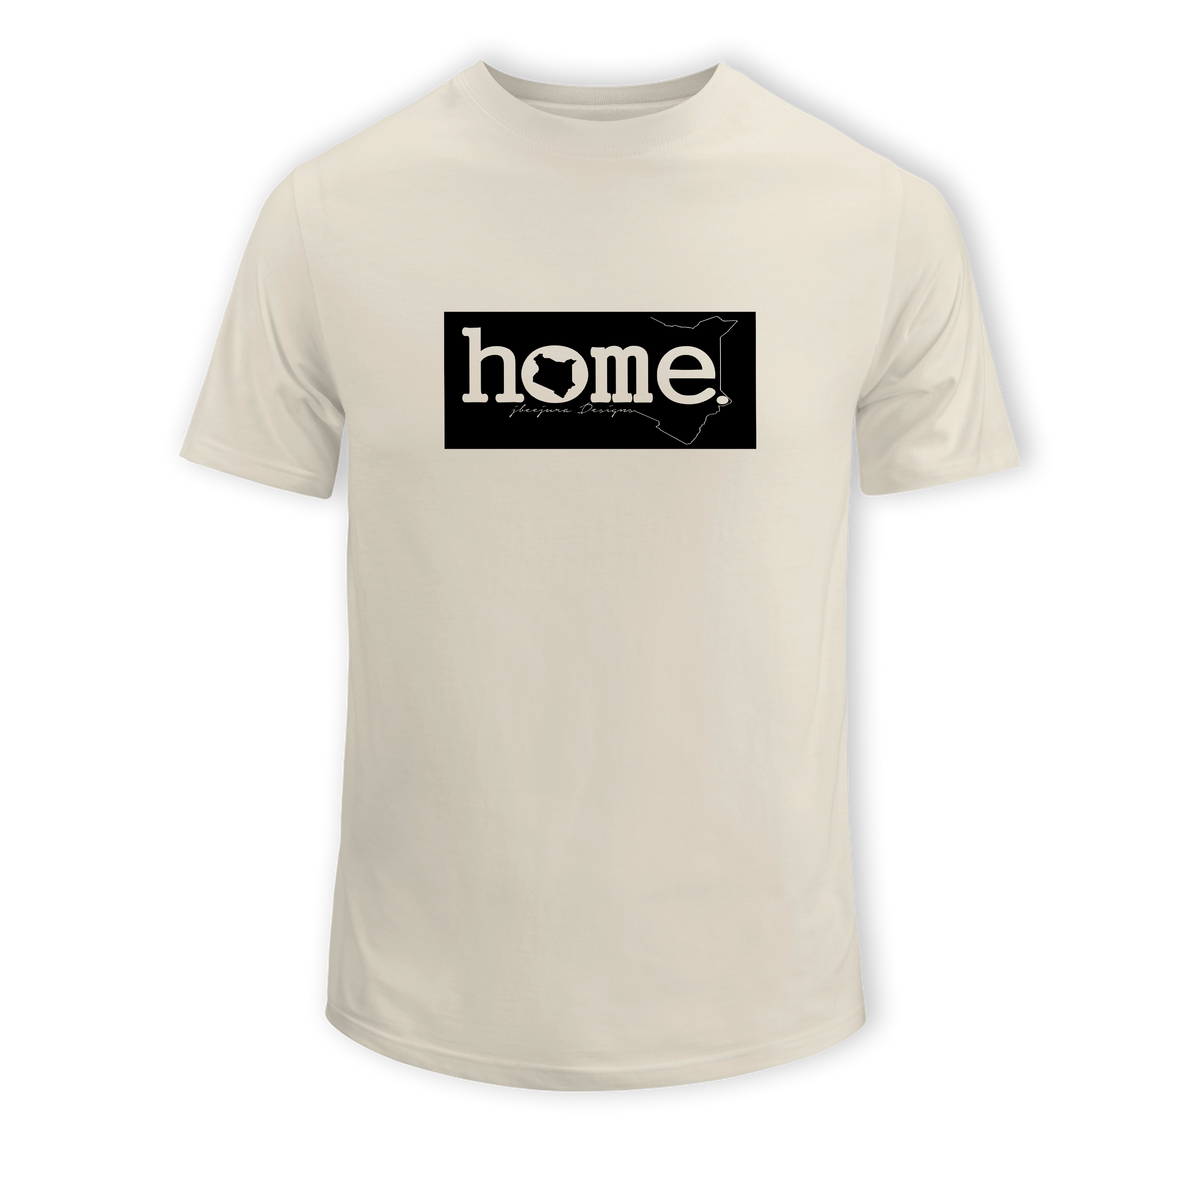 home_254 SHORT-SLEEVED NUDE T-SHIRT WITH A BLACK CLASSIC PRINT – COTTON PLUS FABRIC